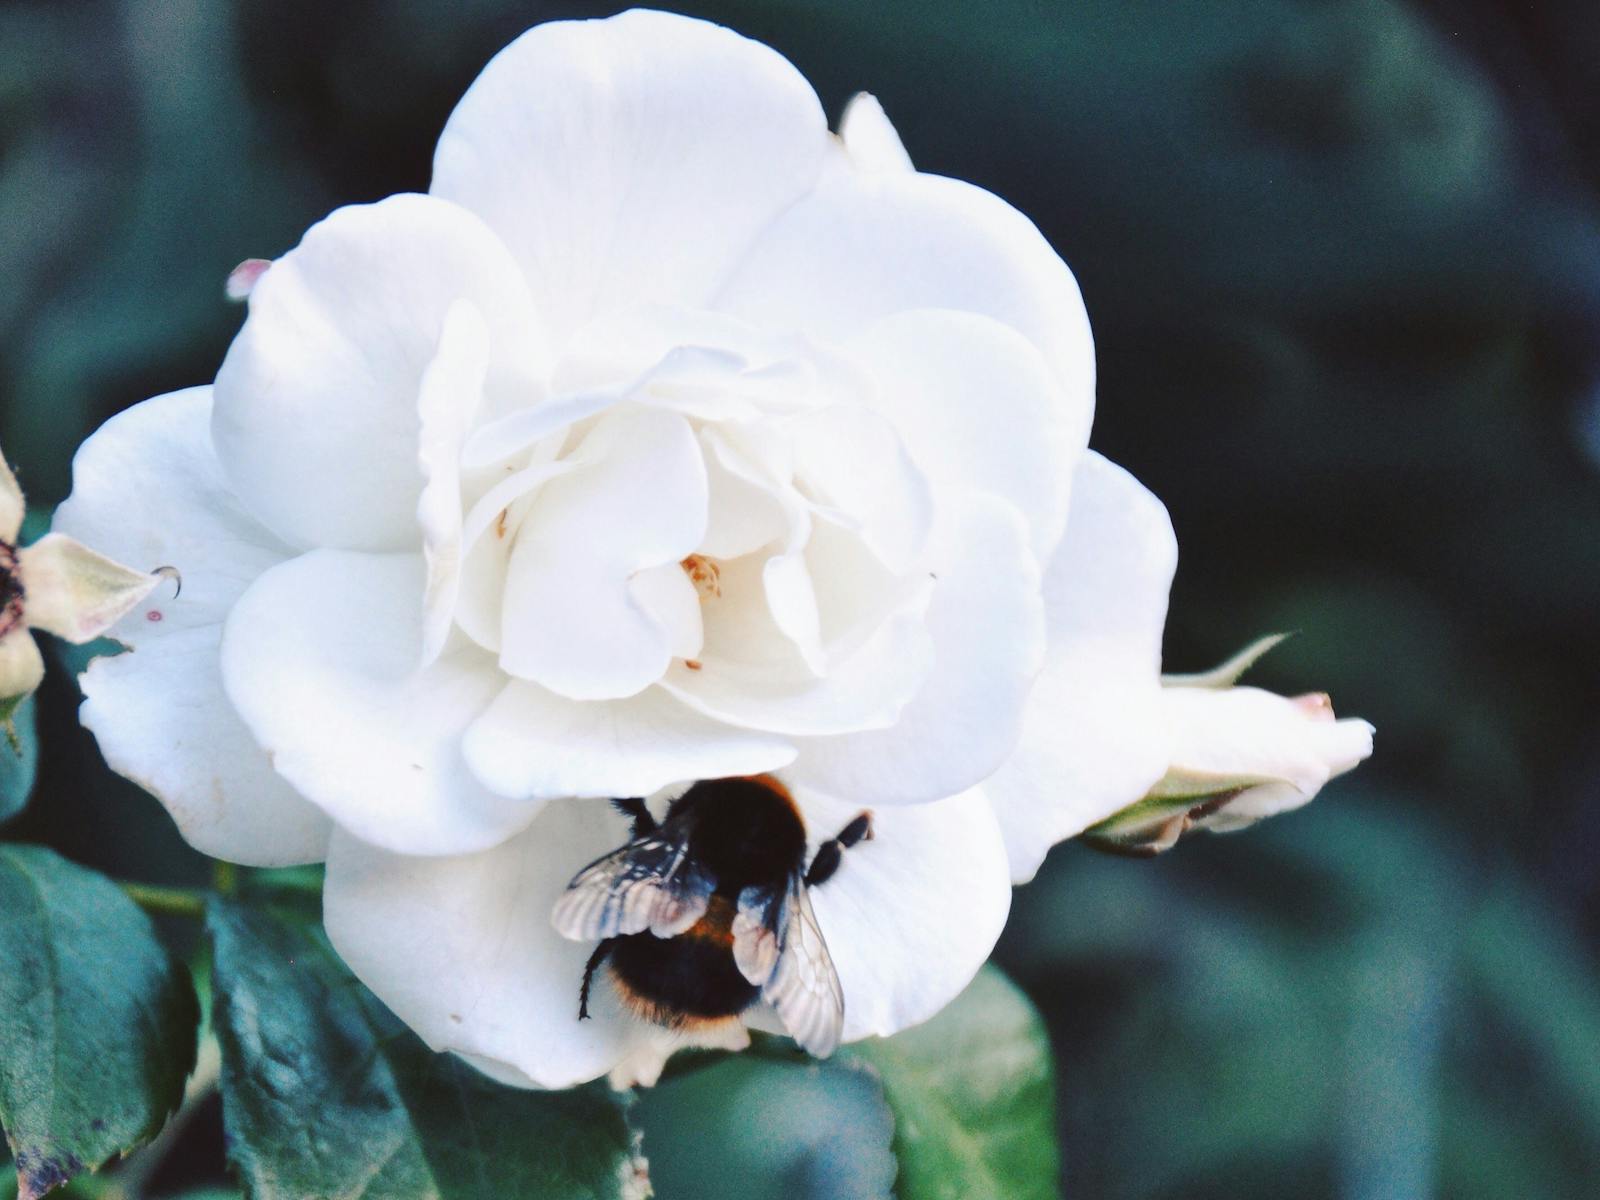 A bumblebee working on a beautiful winter rose in the gardens.